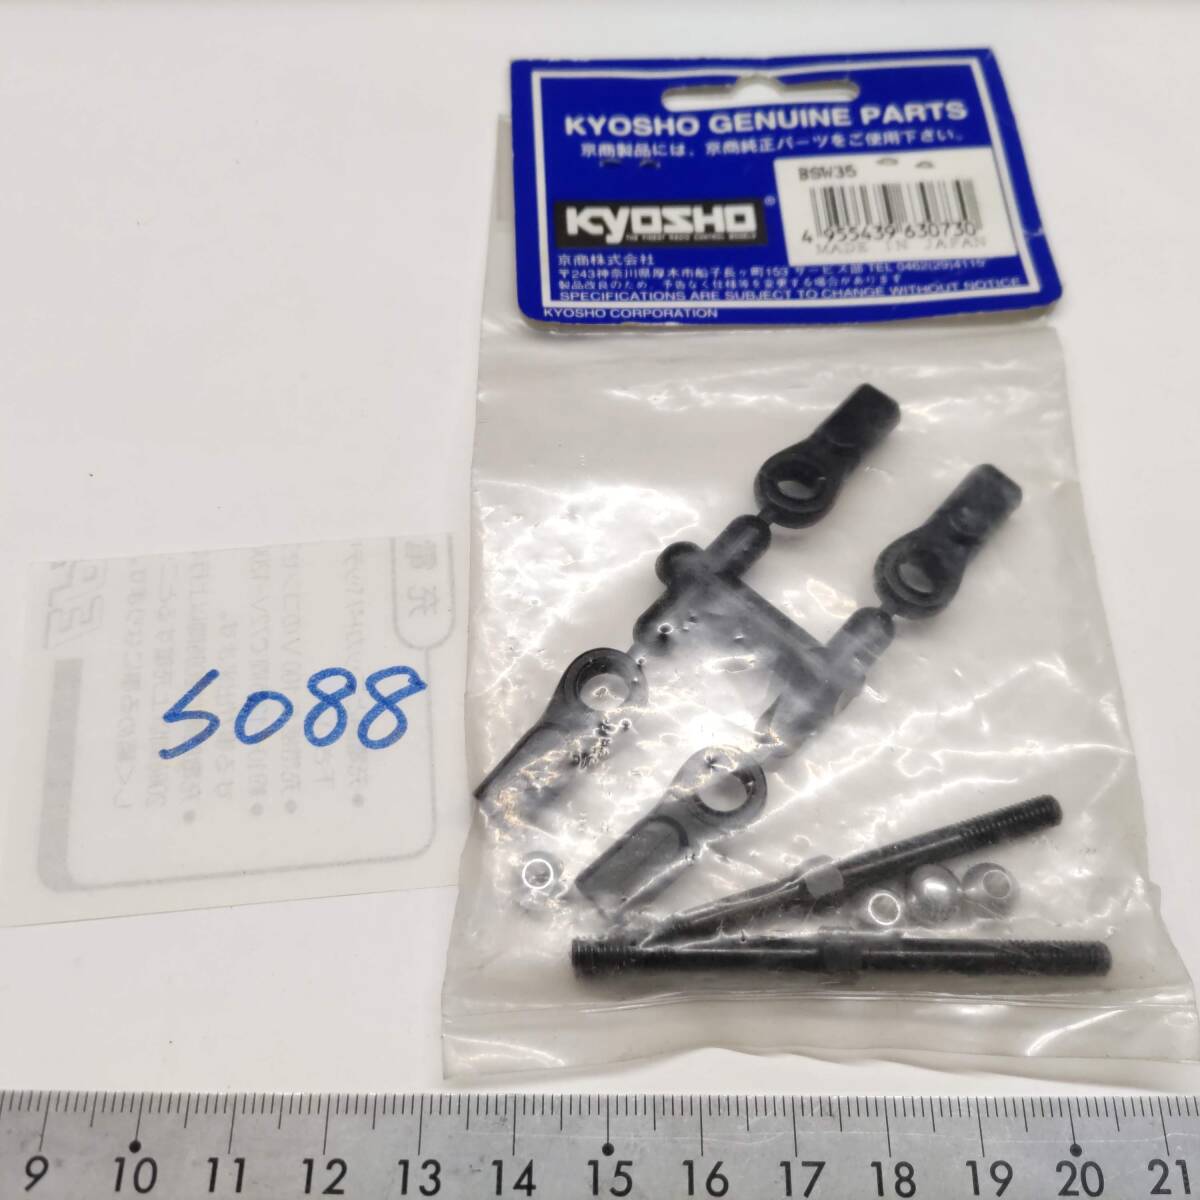 S088　KYOSHO 京商　BSW35 タイロッドSP　Special tie rod　未開封 長期保管品_画像4